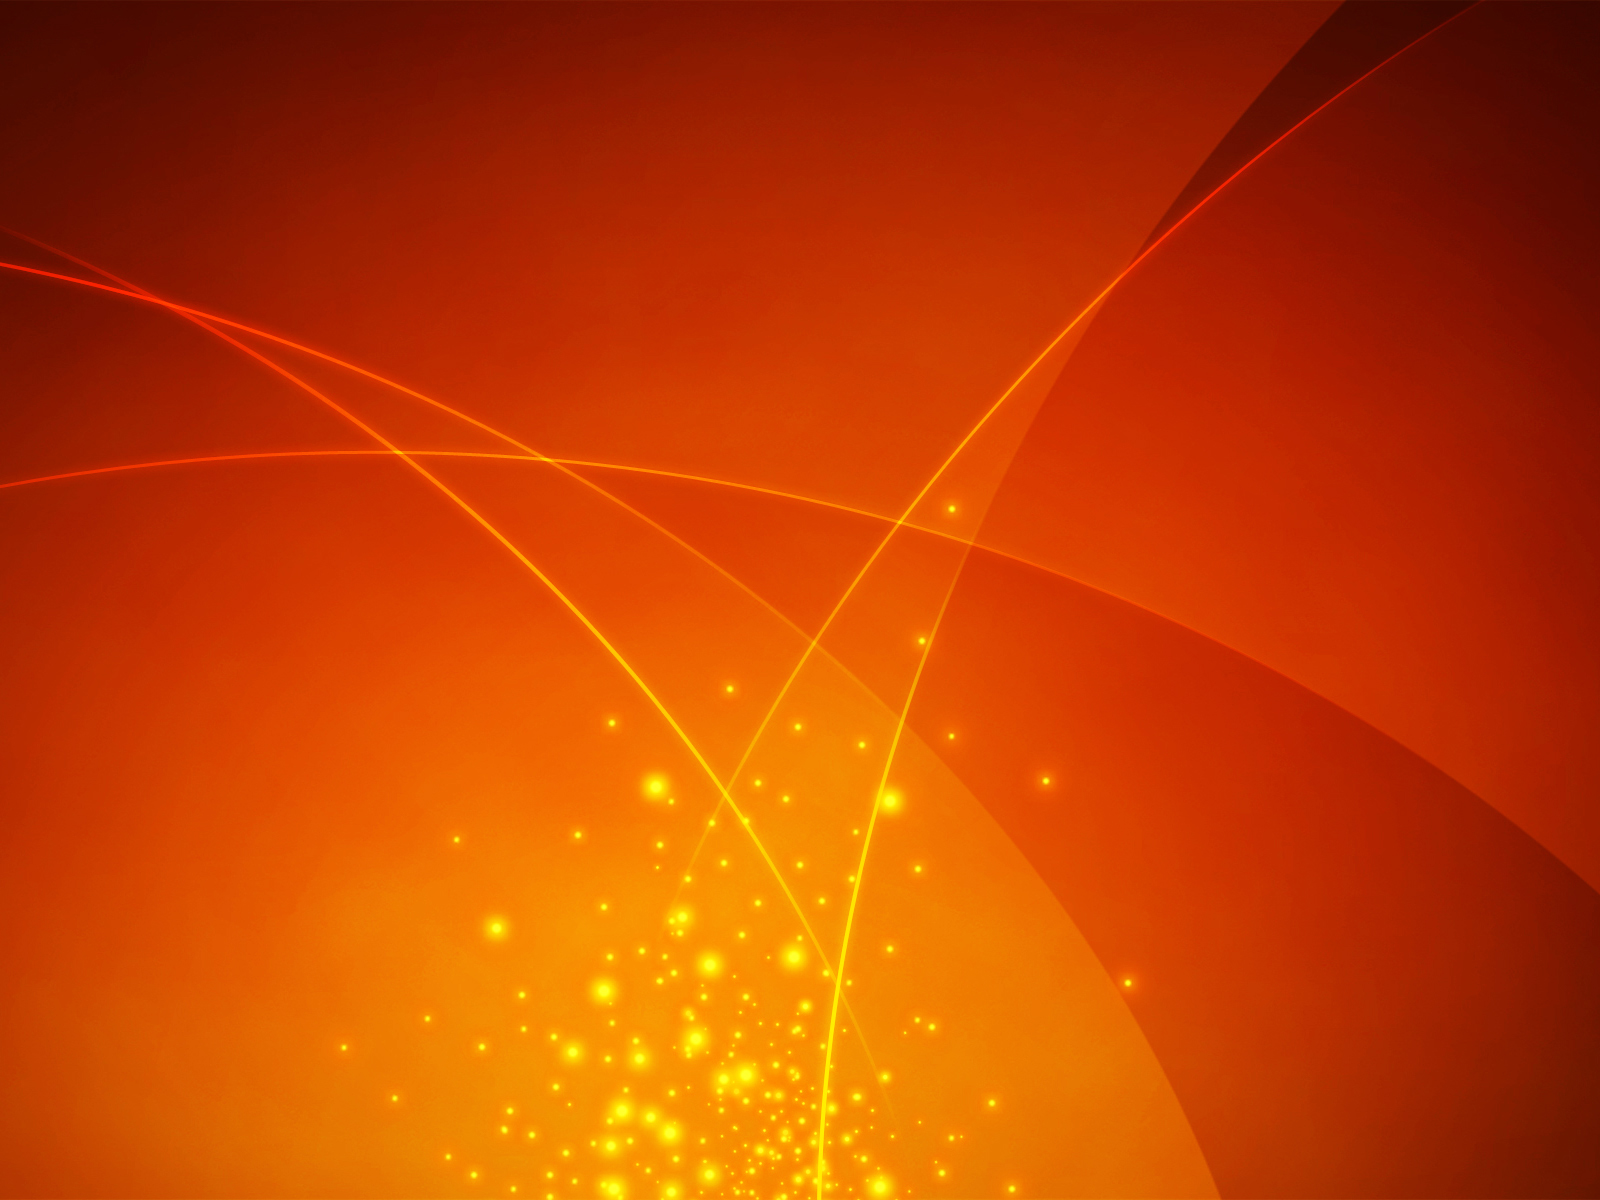 Orange Abstract Design Backgrounds   PPT Backgrounds Templates 1600x1200